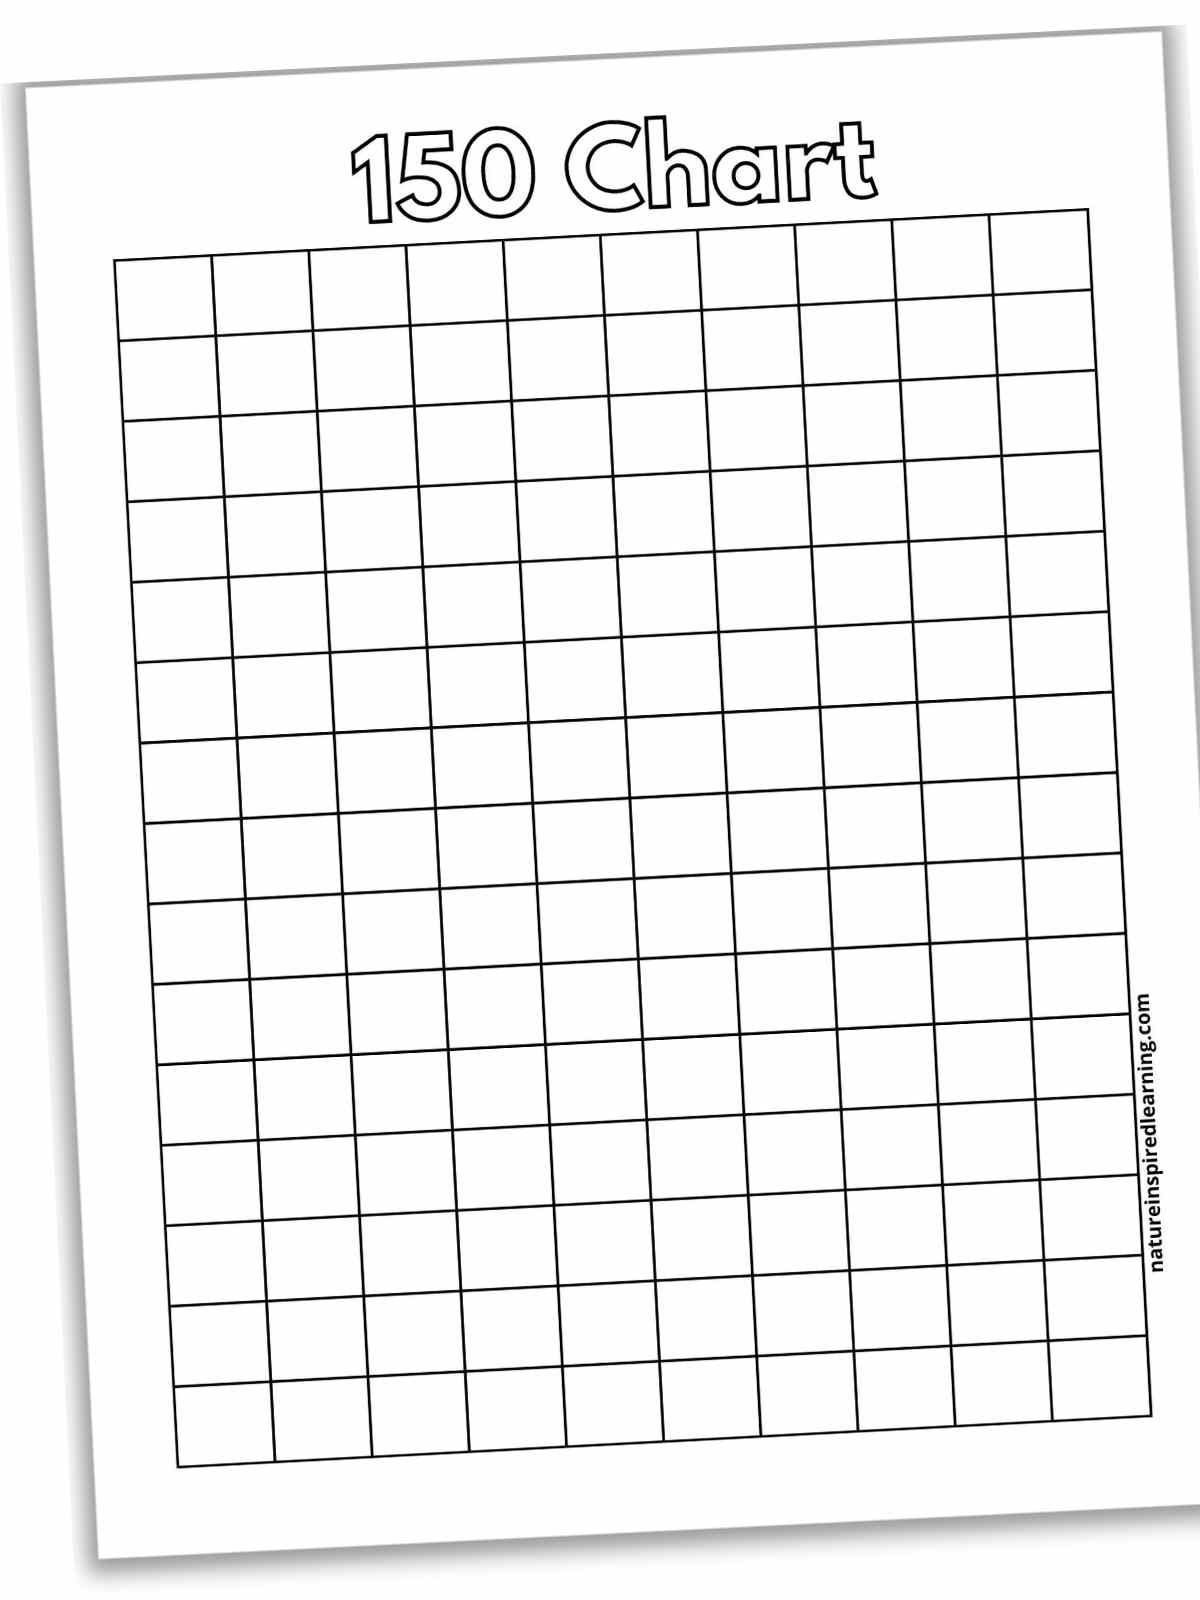 horizontal black and white chart with a large blank grid with a title in outline form across the top